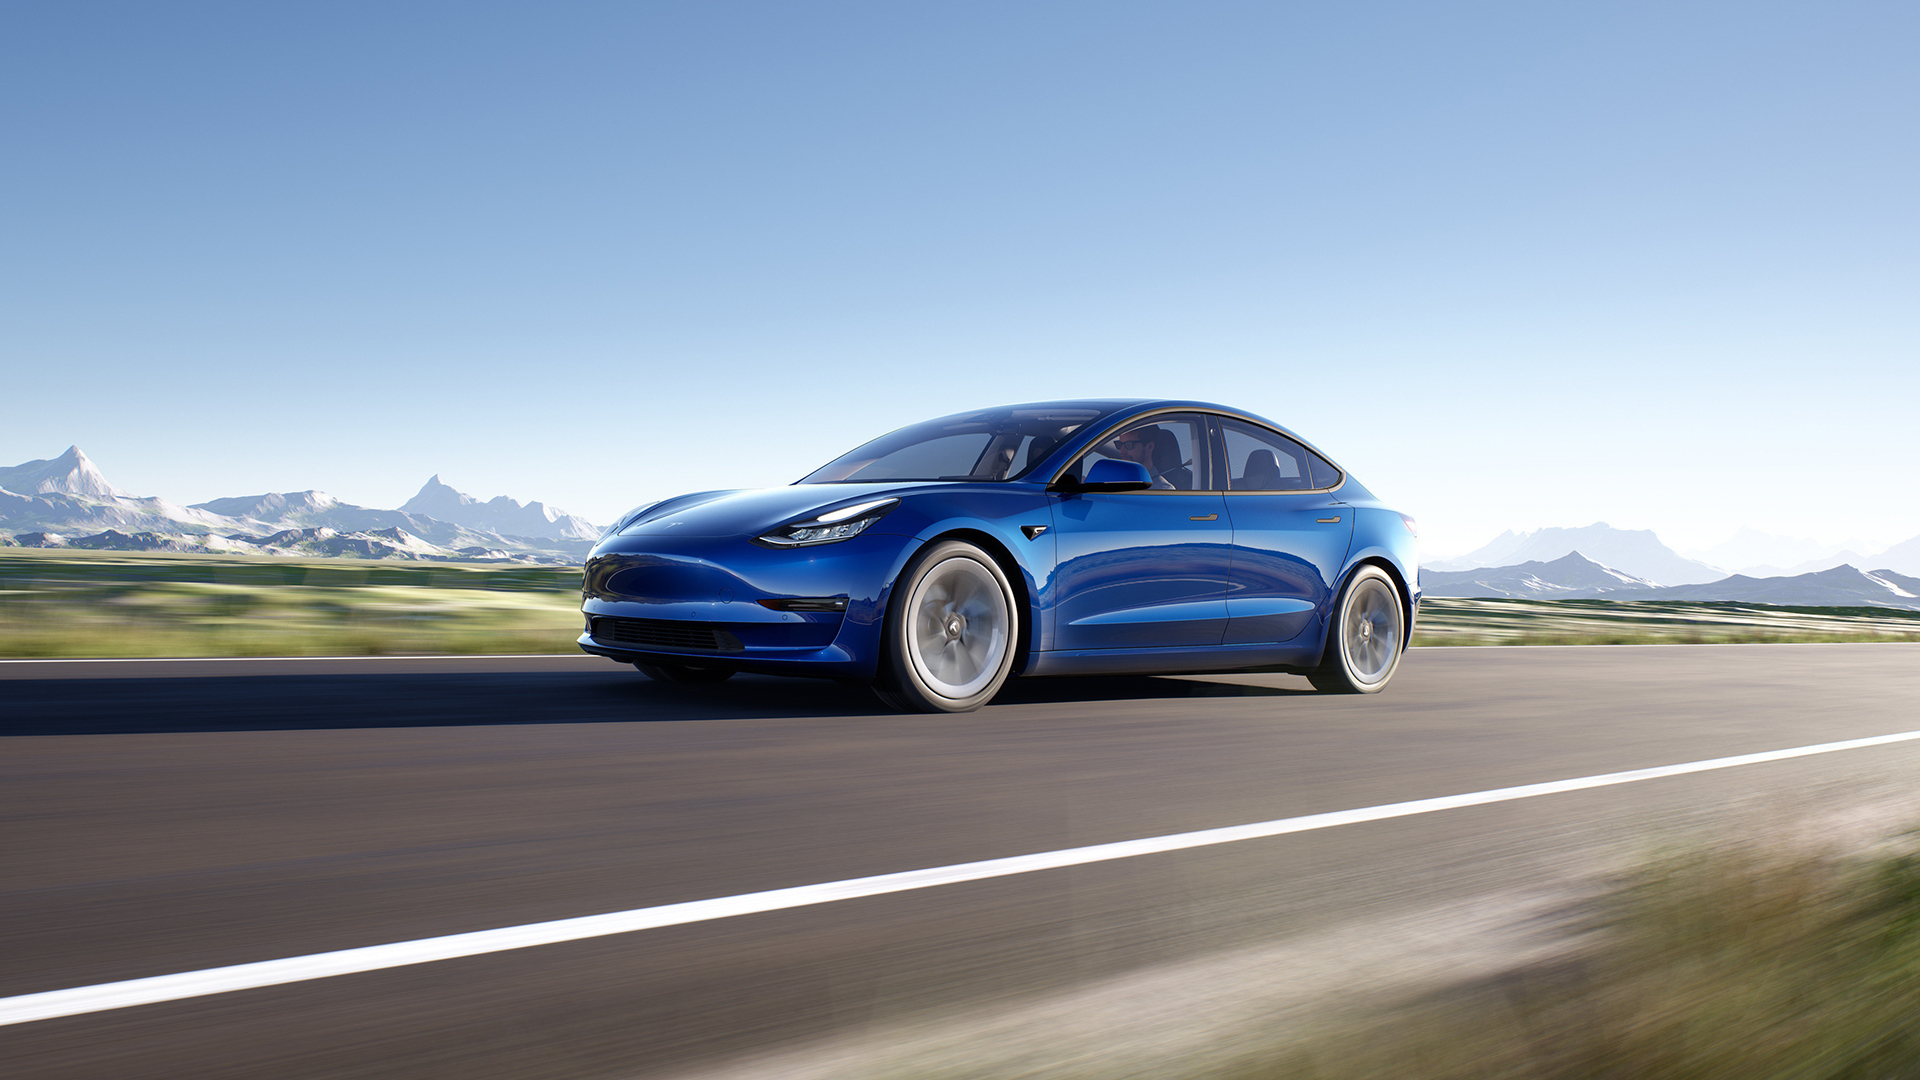 Tesla drops prices again, with Model 3 and Model Y now discounted